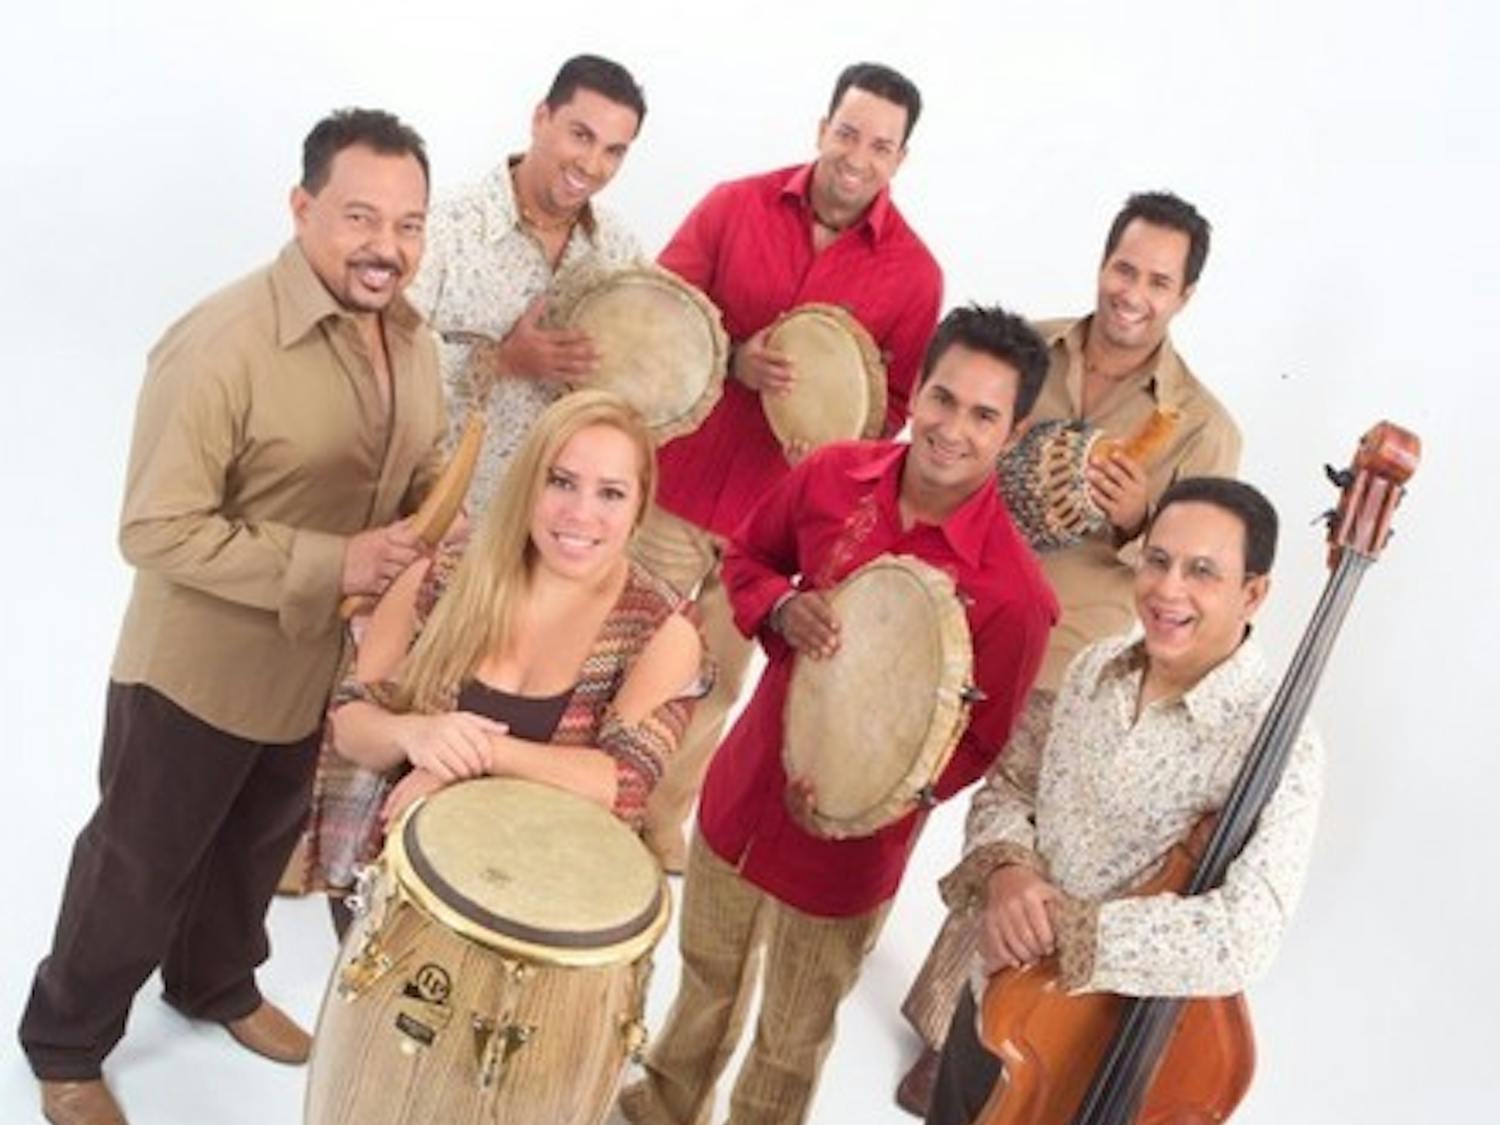 The Afro-Latin music group 